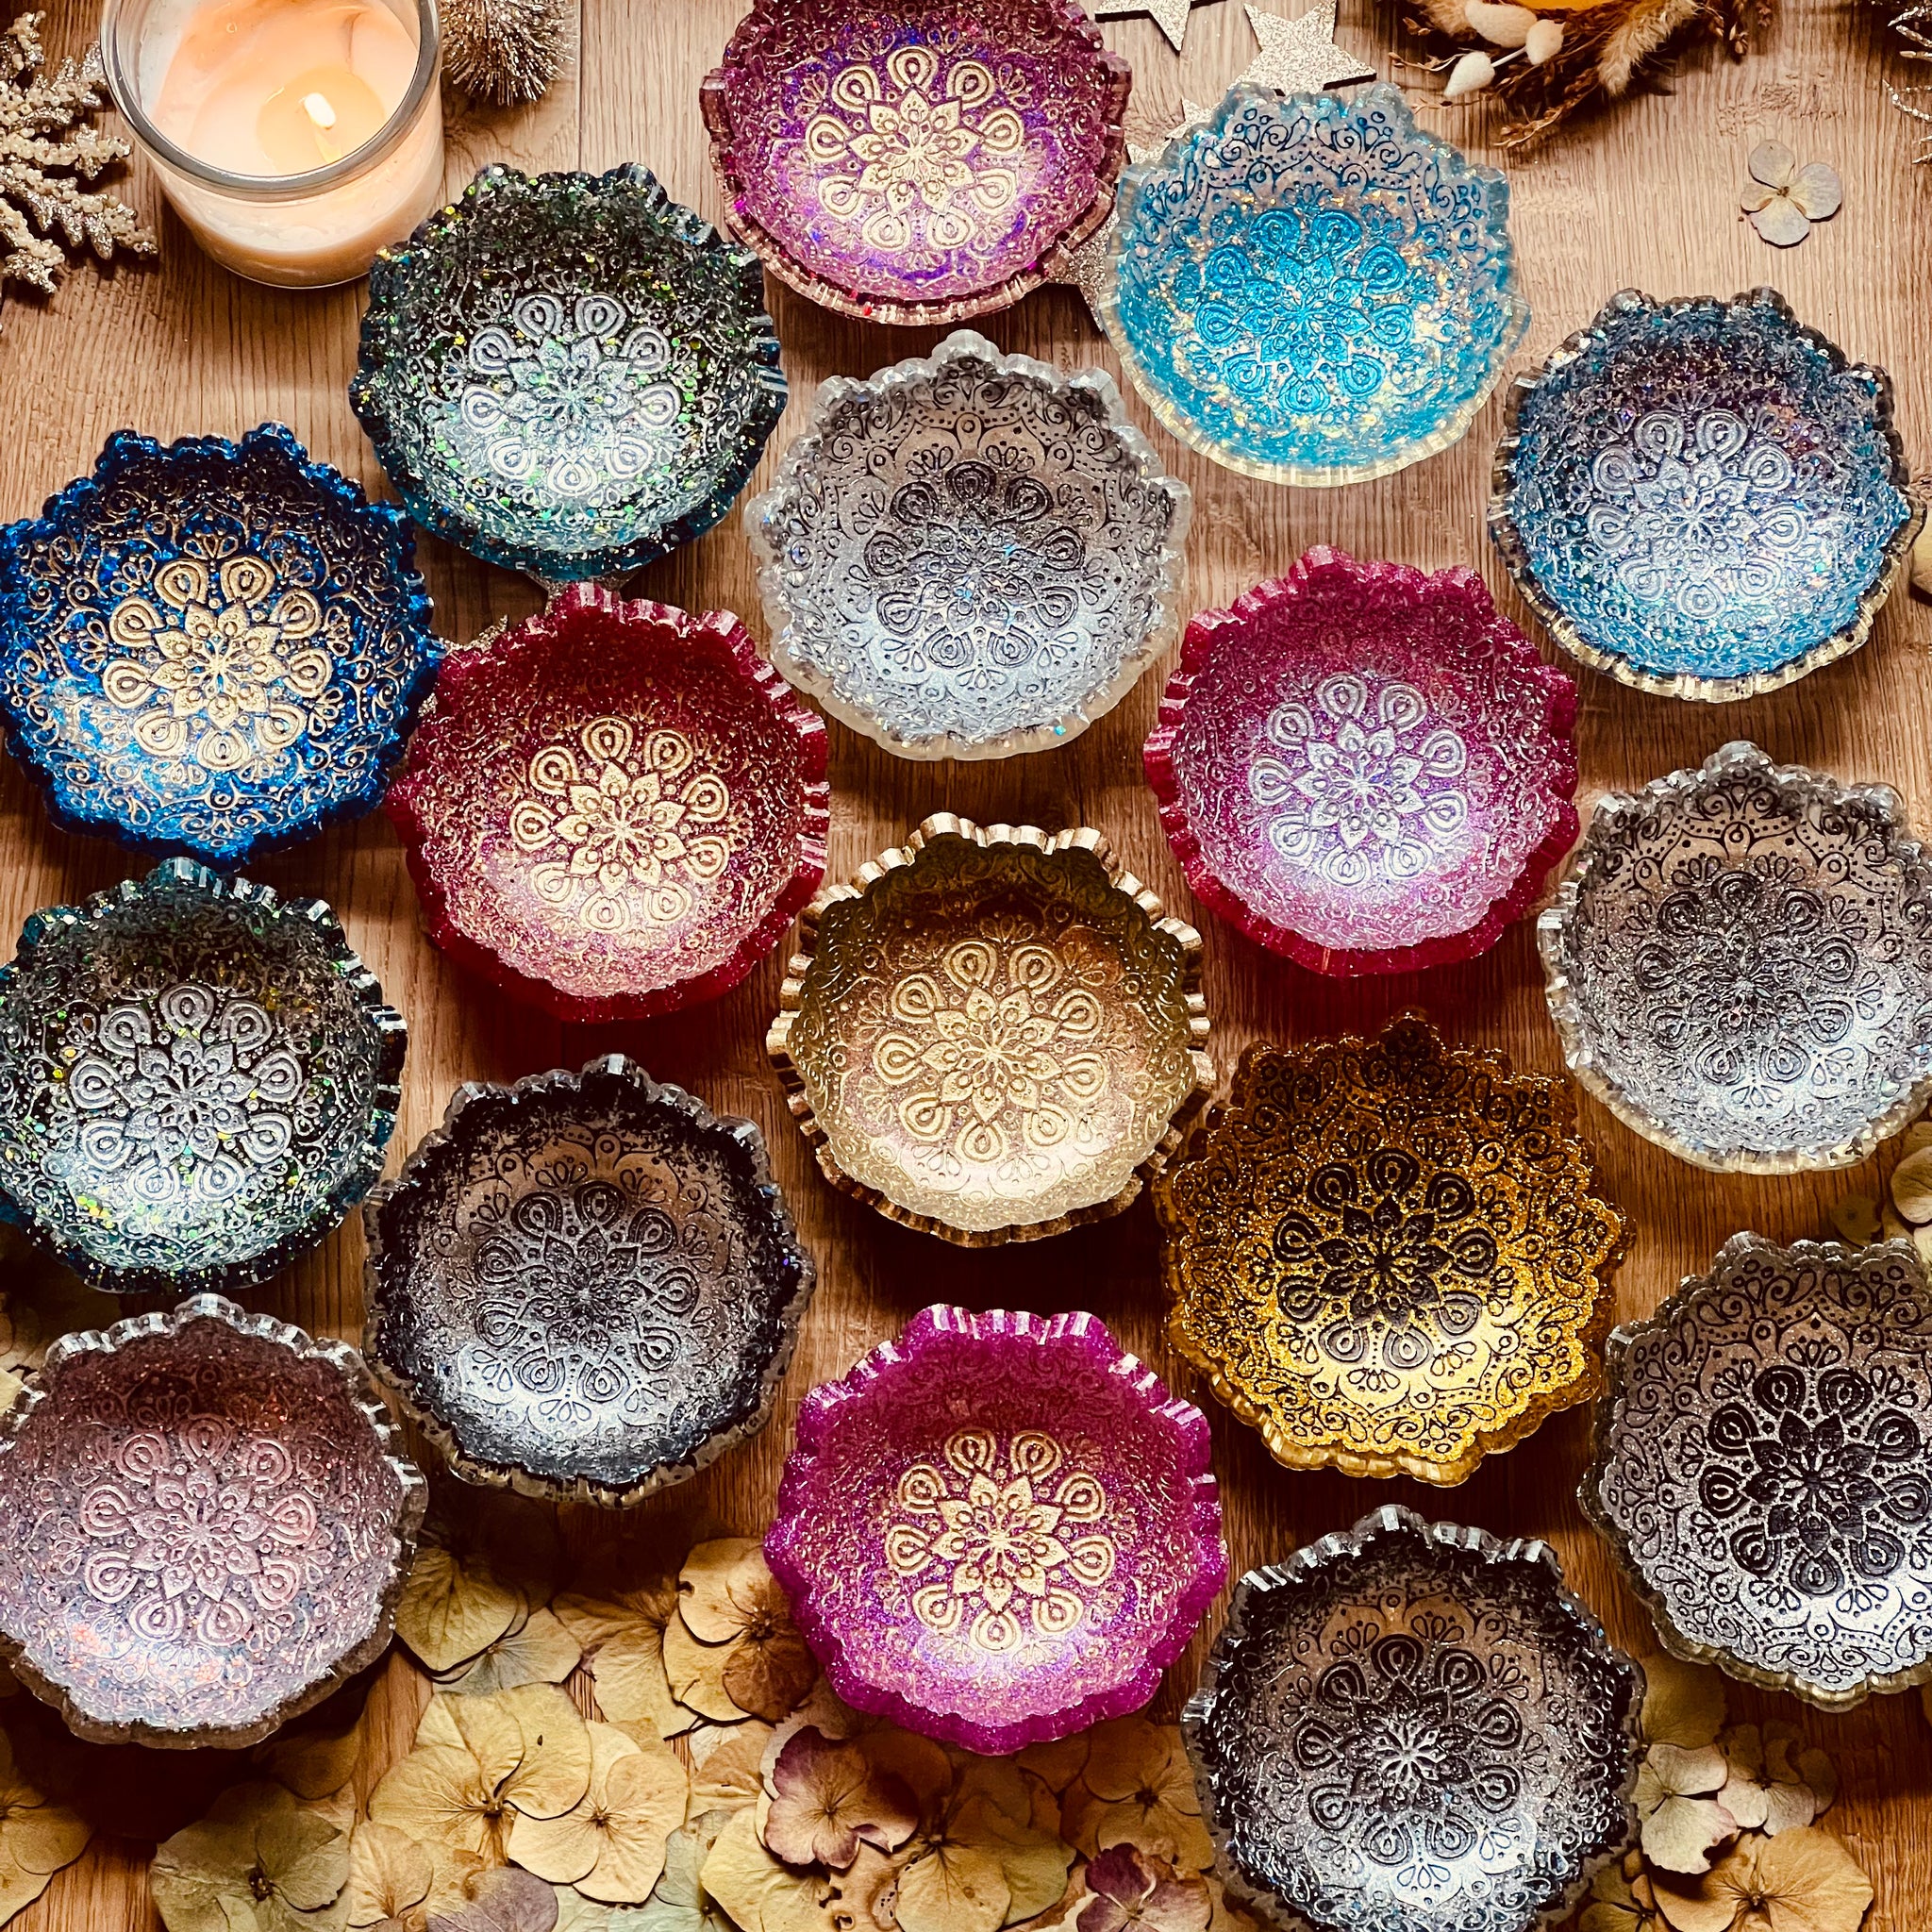 Mandala jewelry bowls made of resin in different colors